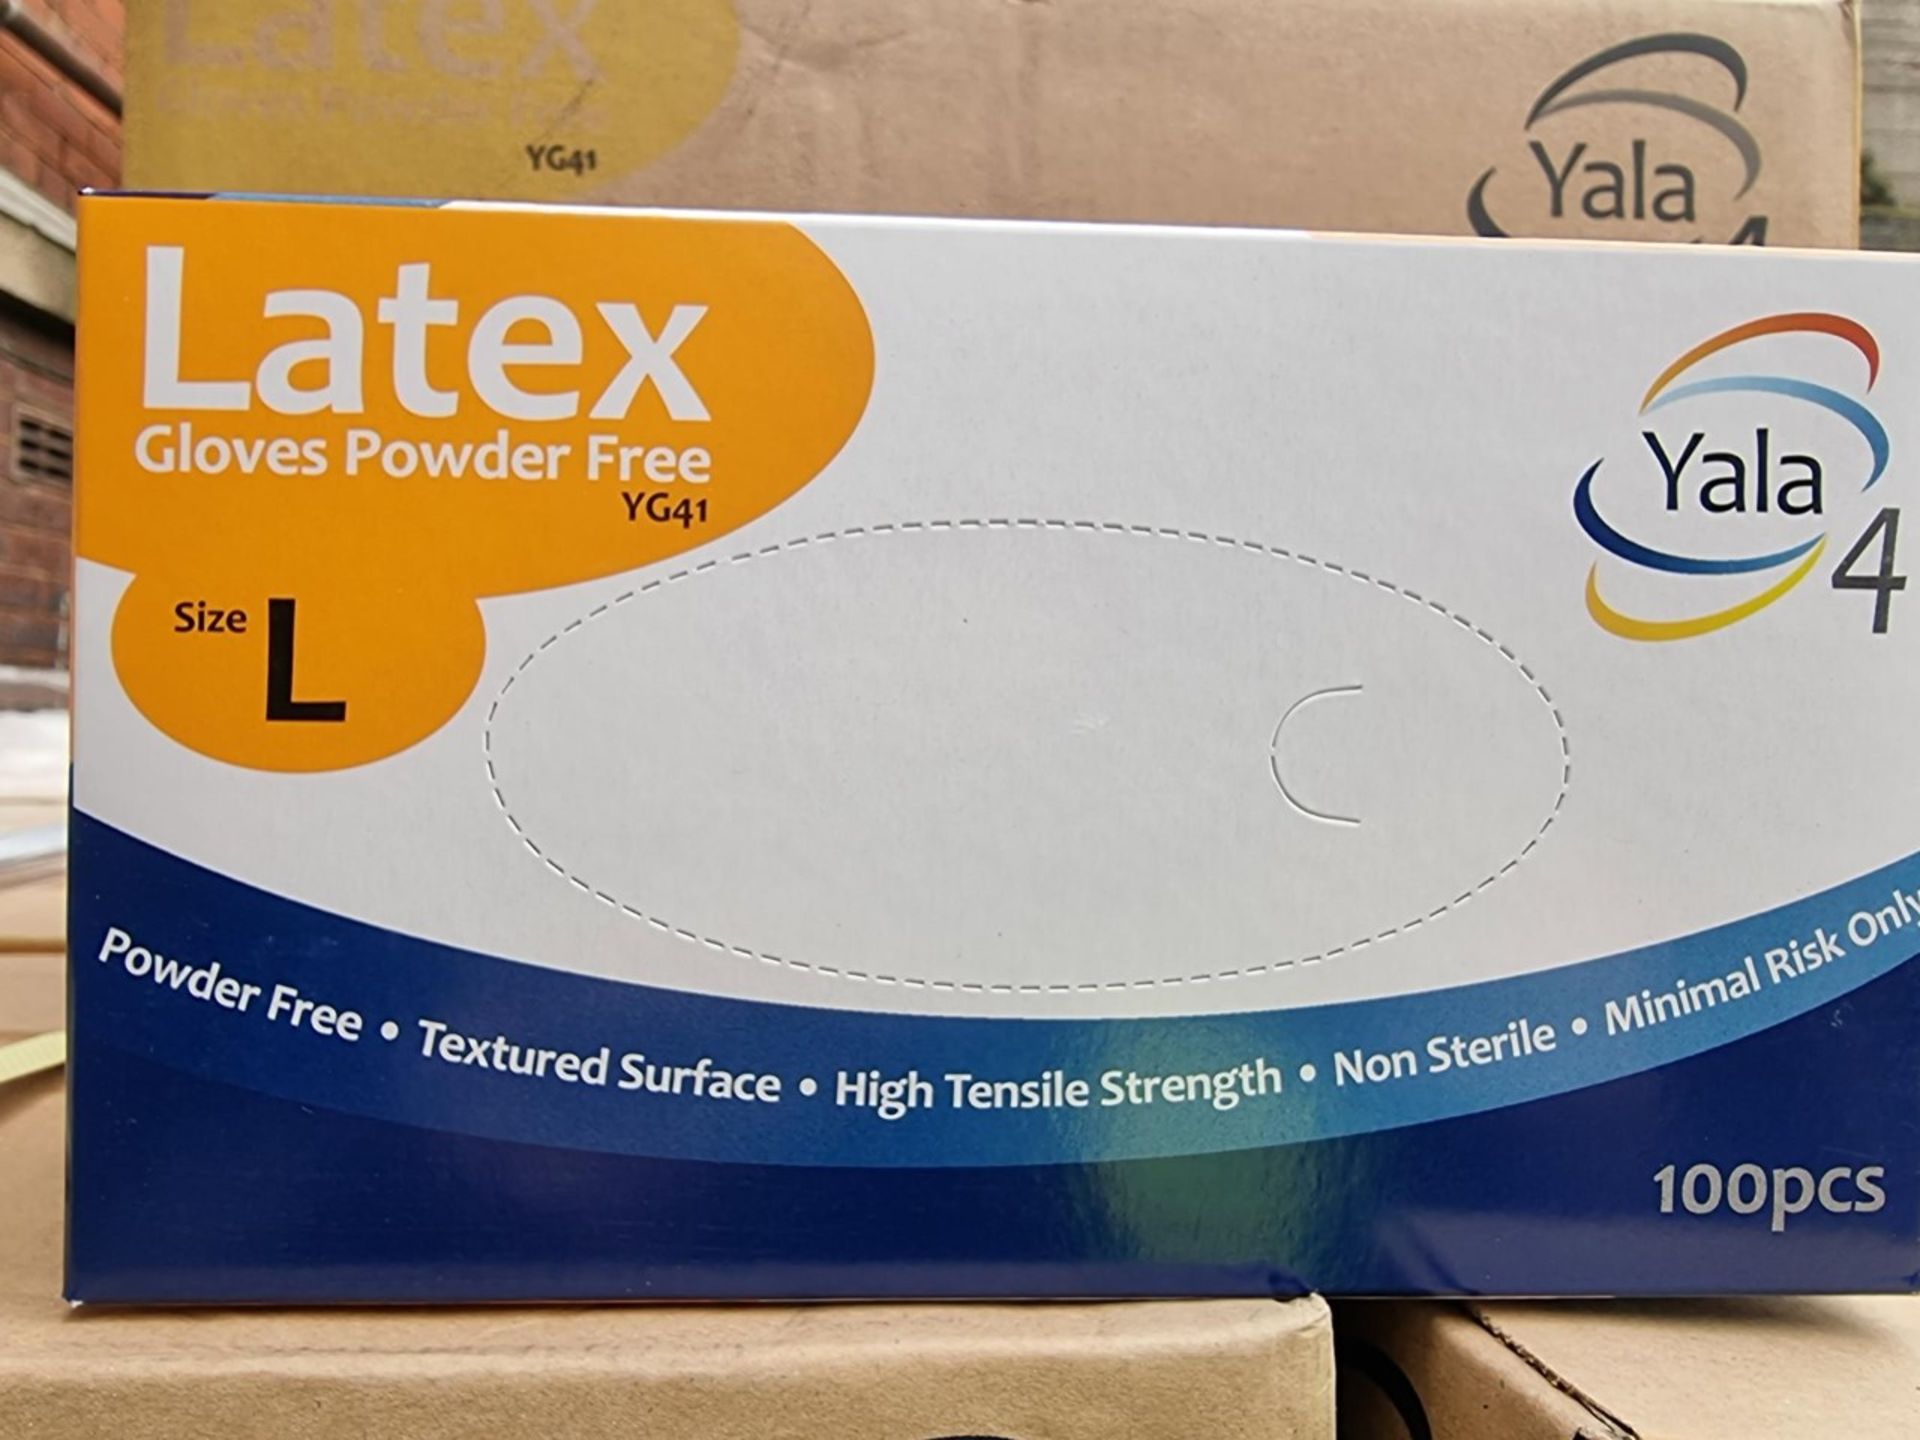 10 X BOXES EACH CONTAINING 10 BOXES OF 100 YALA LATEX POWDER FREE GLOVES. SIZE LARGE. 100 BOXES OF